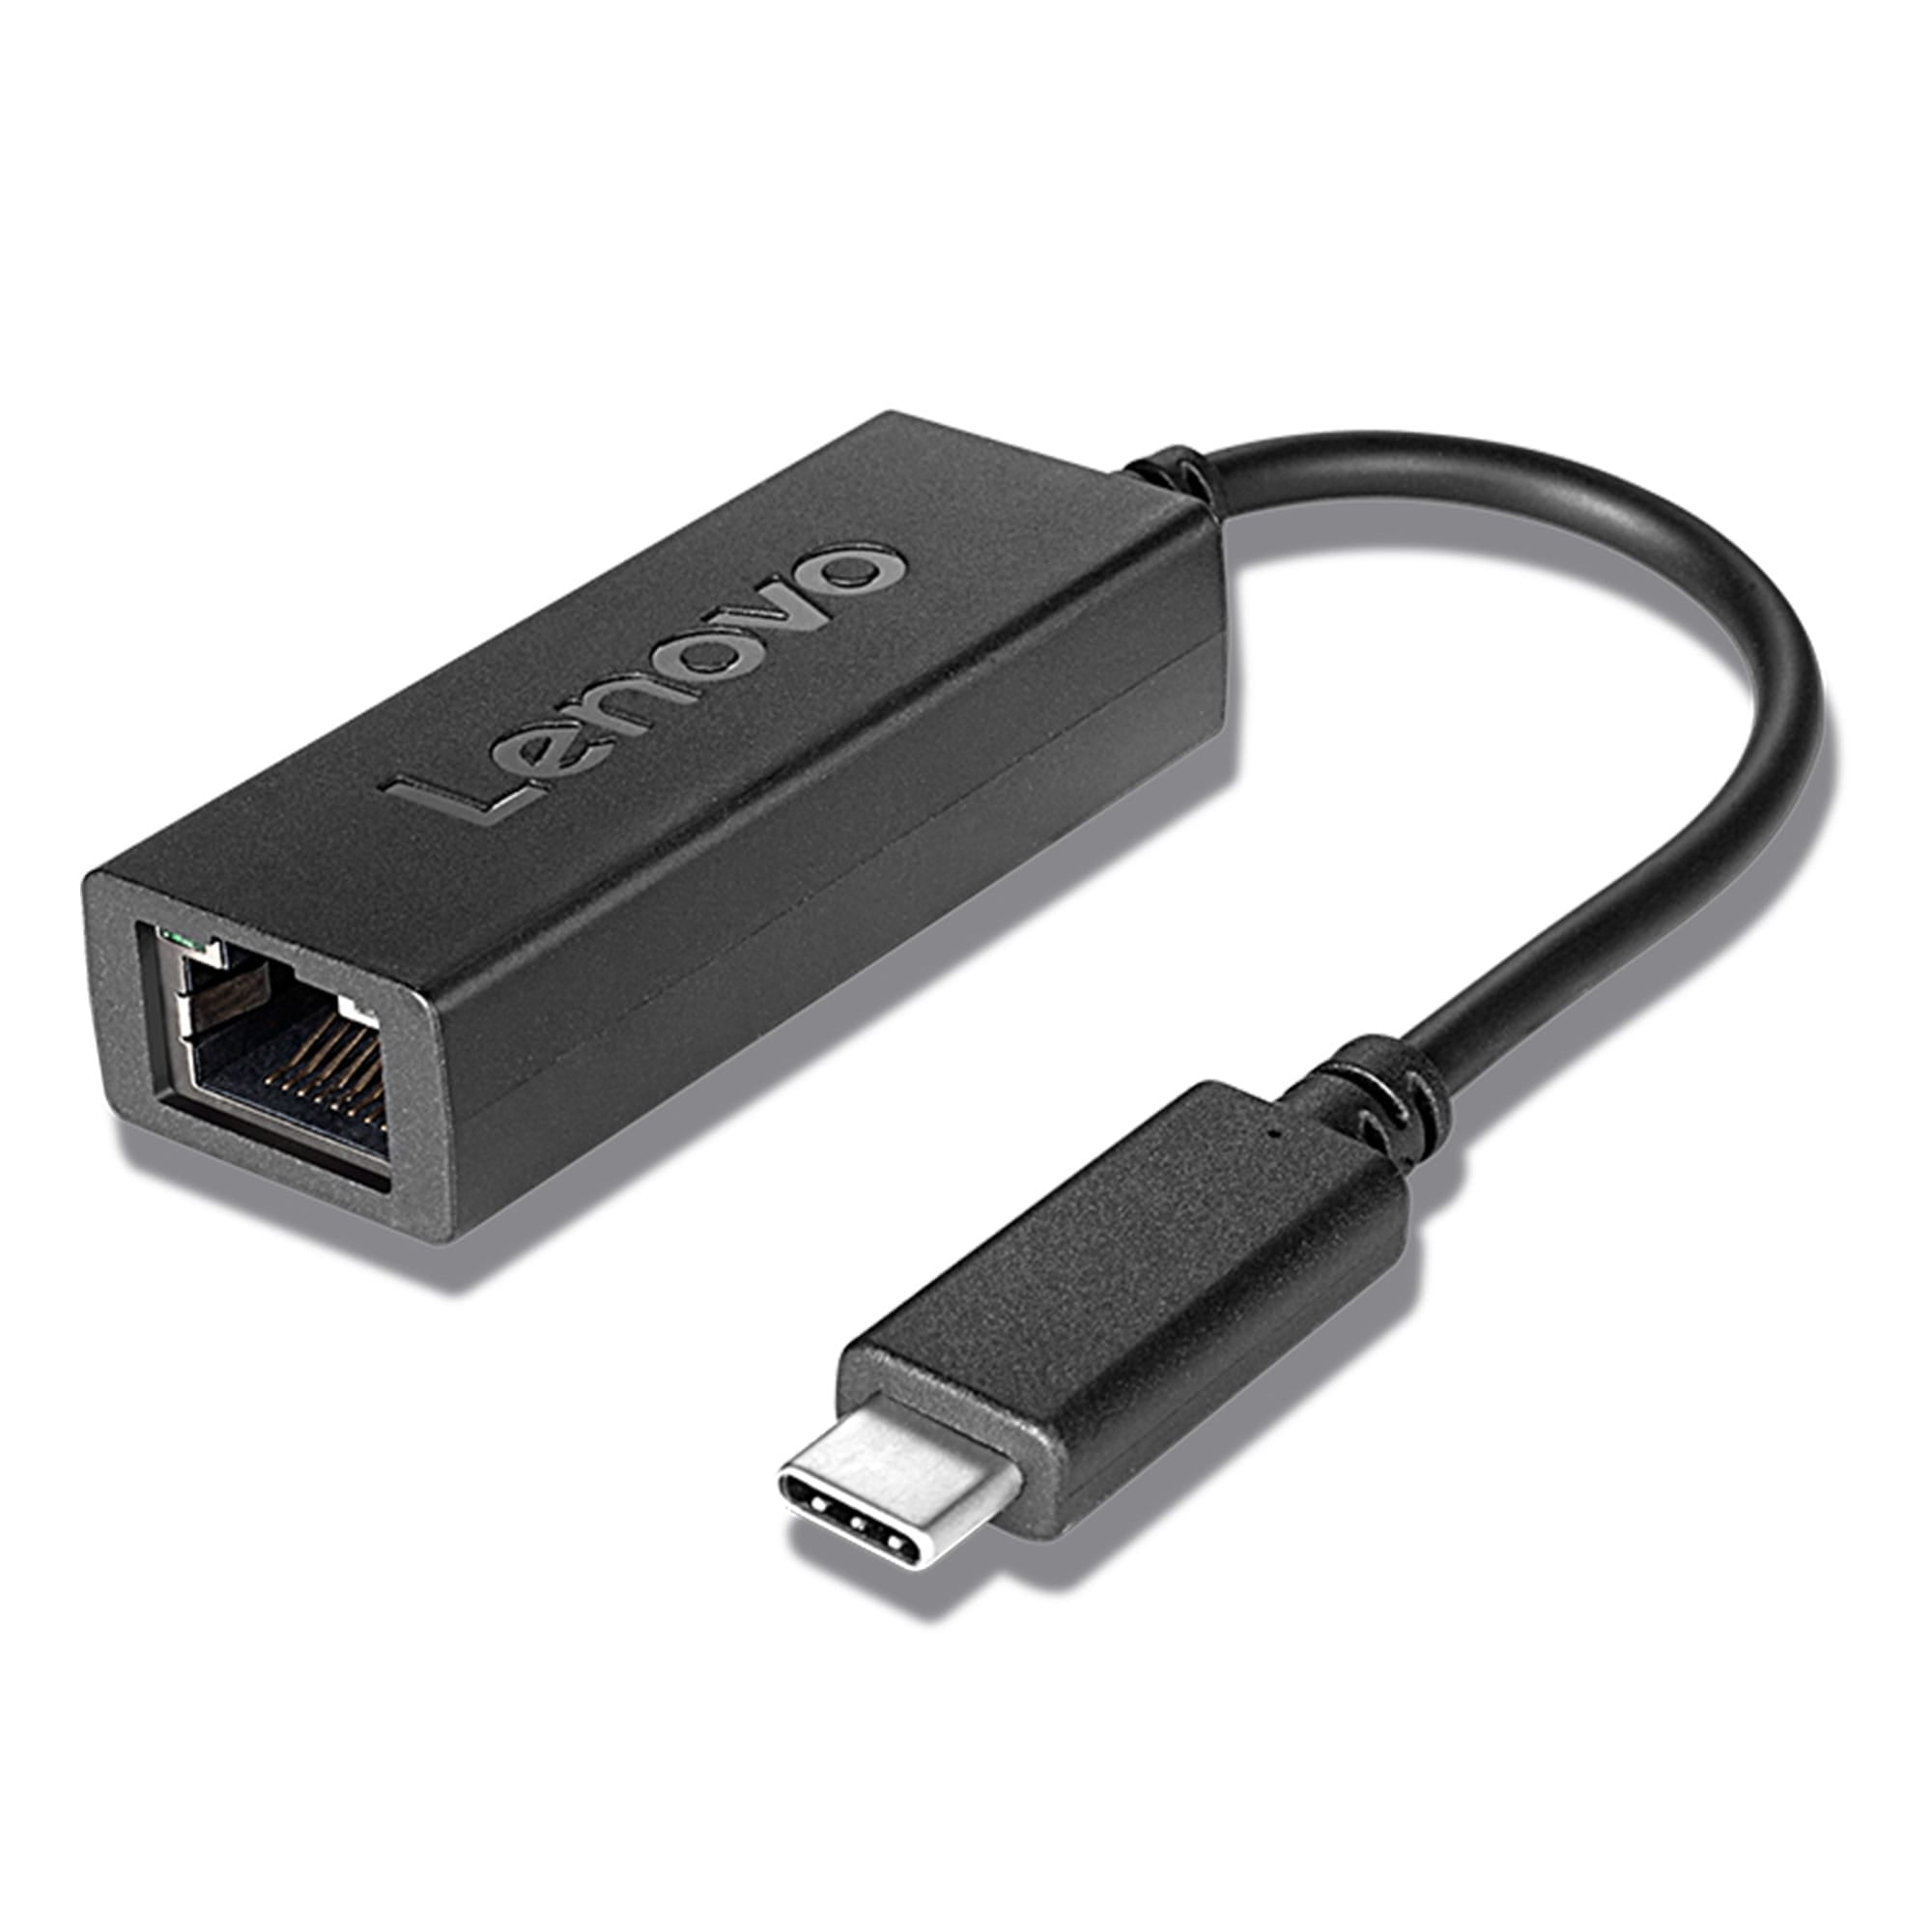 Lenovo USB-C to Ethernet Adapter - RJ-45/USB for Notebook - First End: 1 x RJ-45 Network - Female - Second End: 1 x USB C - Male - 100 Mbit/s - Black - Walmart.com